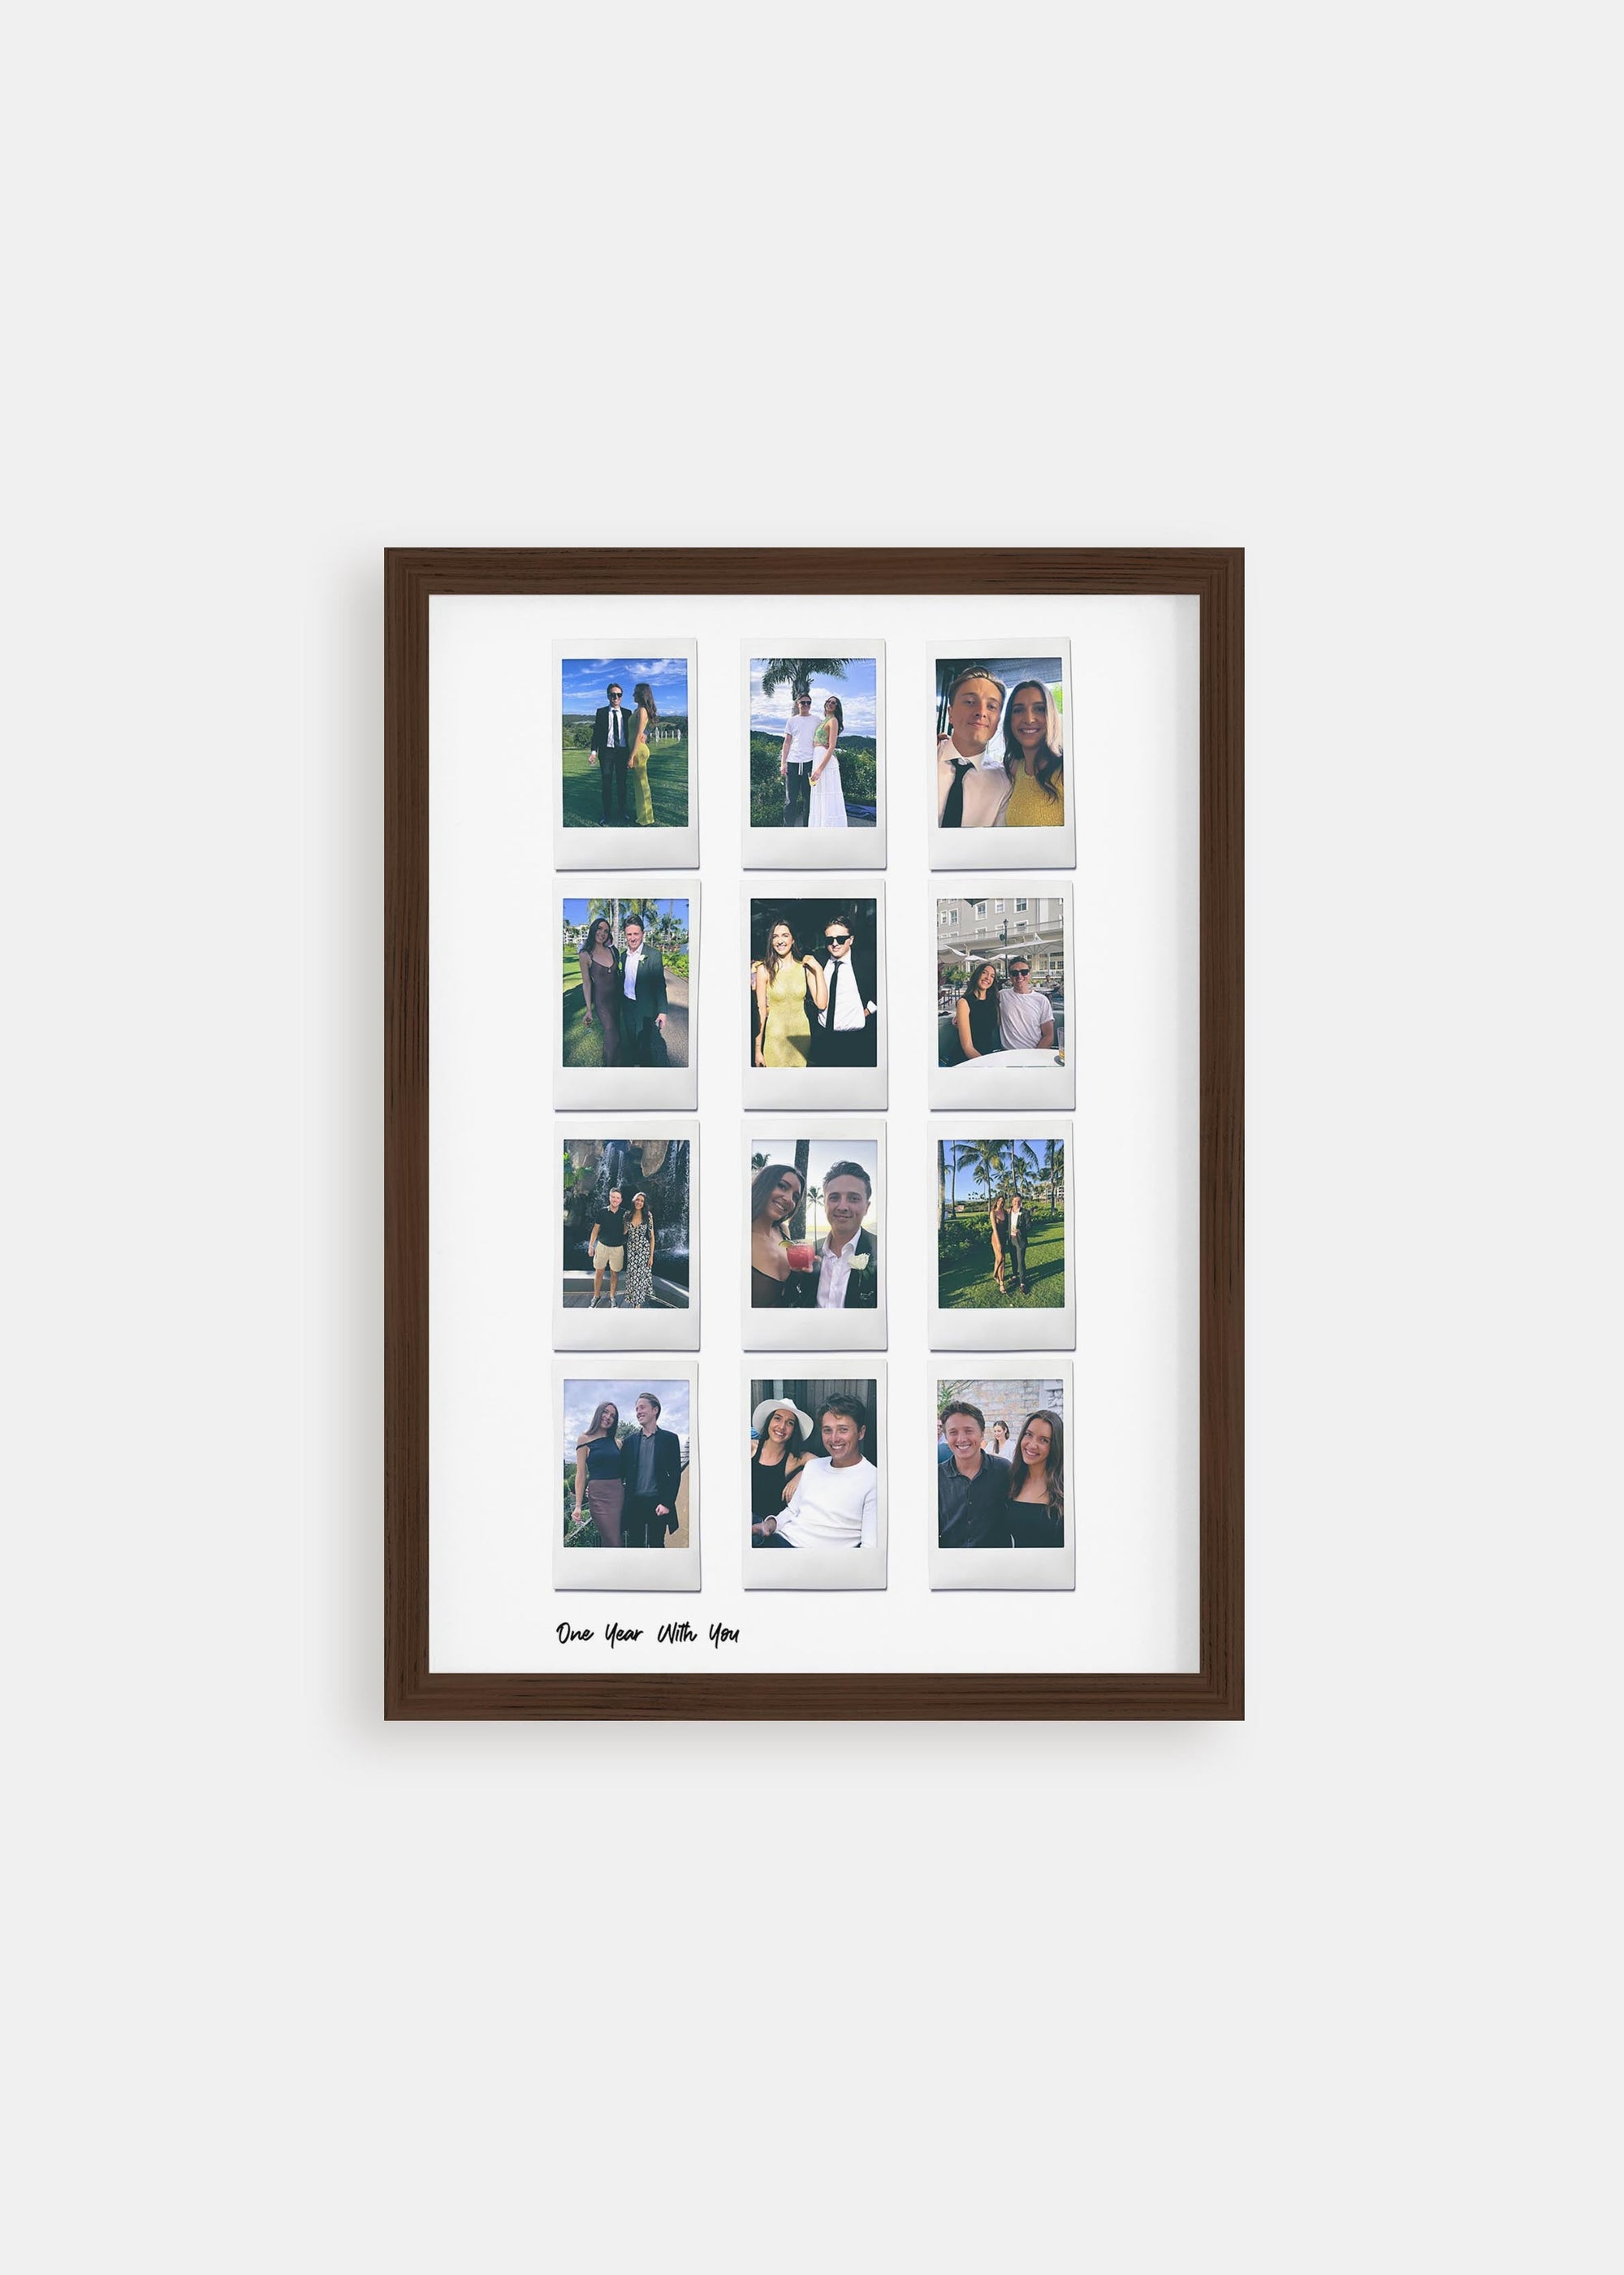 Customized 12 Moments Instant Film Poster featuring a collage of personalized photos arranged in an attractive grid, perfect as a unique photo gift or keepsake.